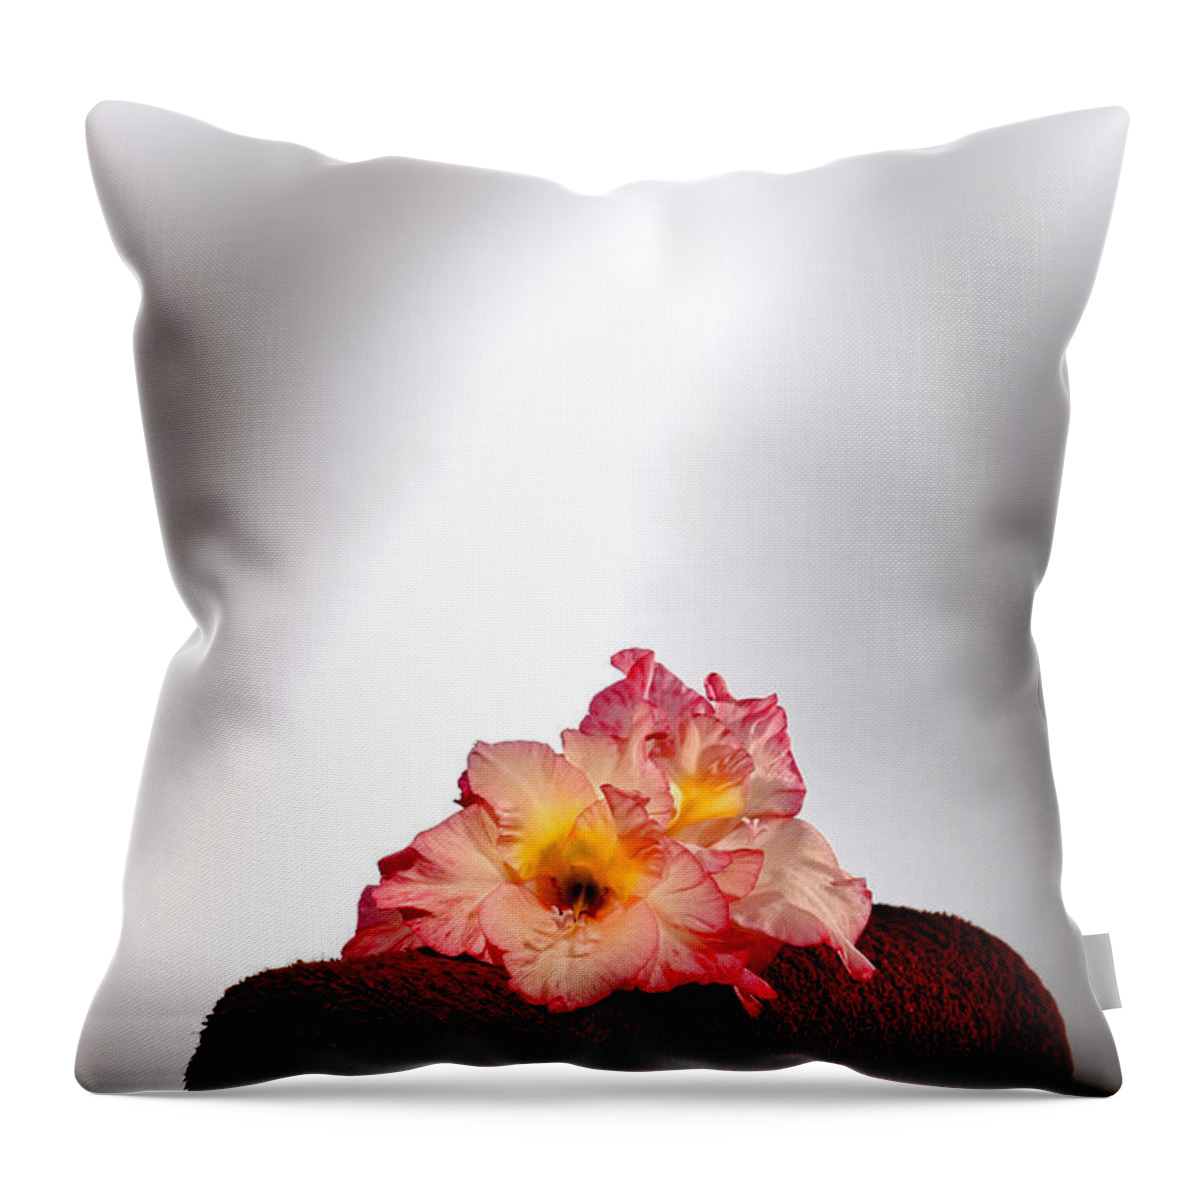 Gladiolus Throw Pillow featuring the photograph Flowers on Towel by Olivier Le Queinec